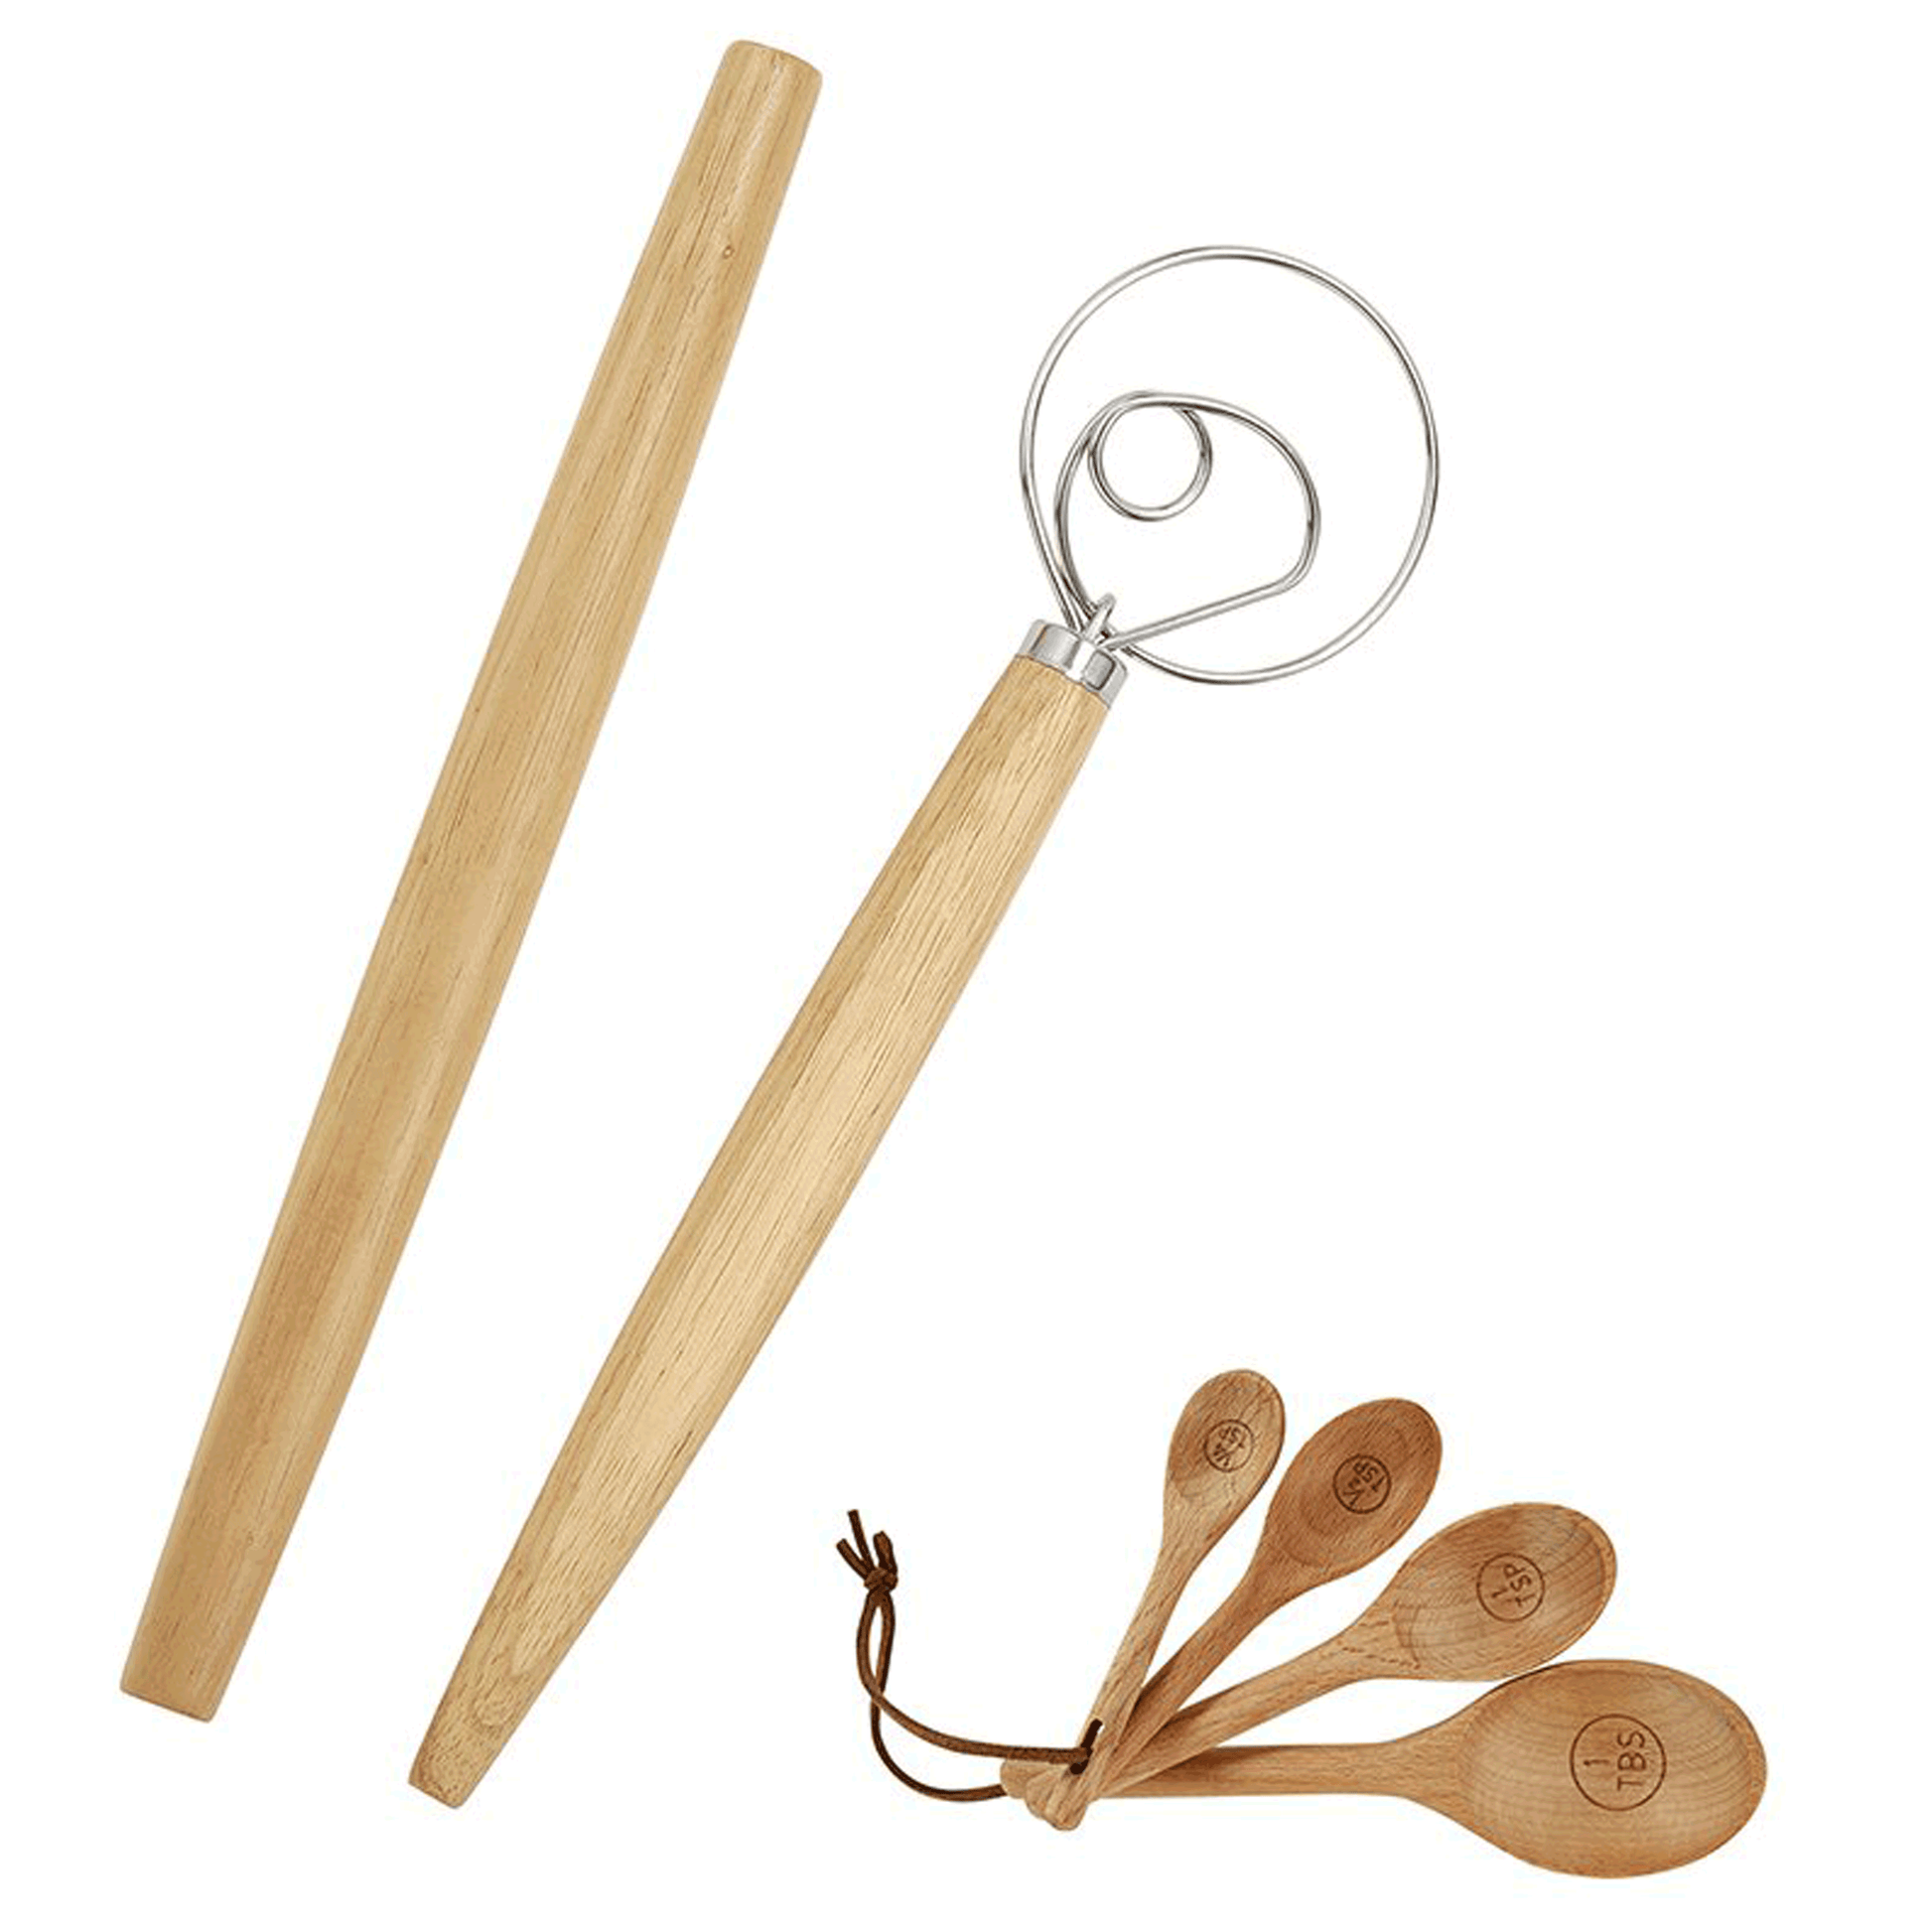 wooden whisk and wooden measuring spoons